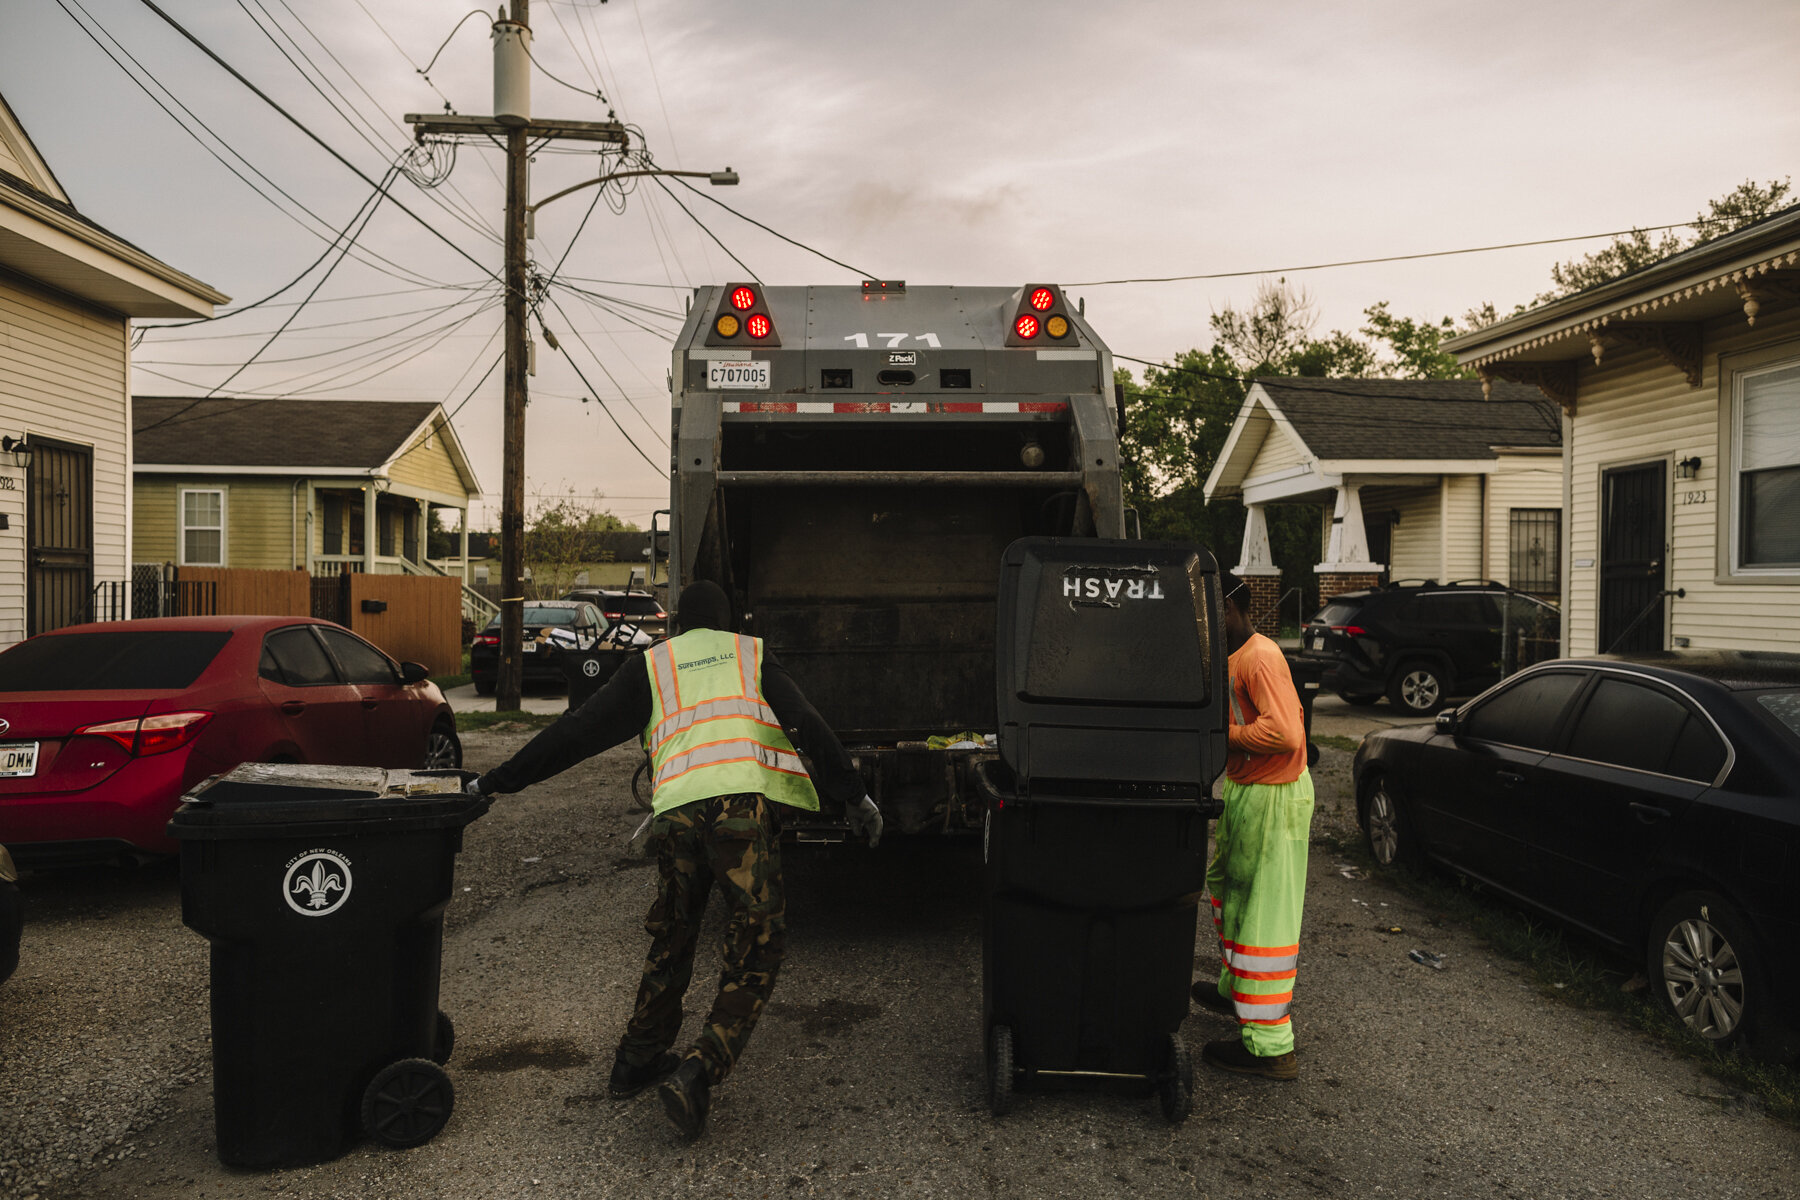  New Orleans, LA - March 24, 2020 - Garbage collectors empty residential garbage cans into the back of a Metro Service Group truck in the 7th Ward of New Orleans.  The company has begun furnishing extra rubber gloves, facemasks, and handkerchiefs to 